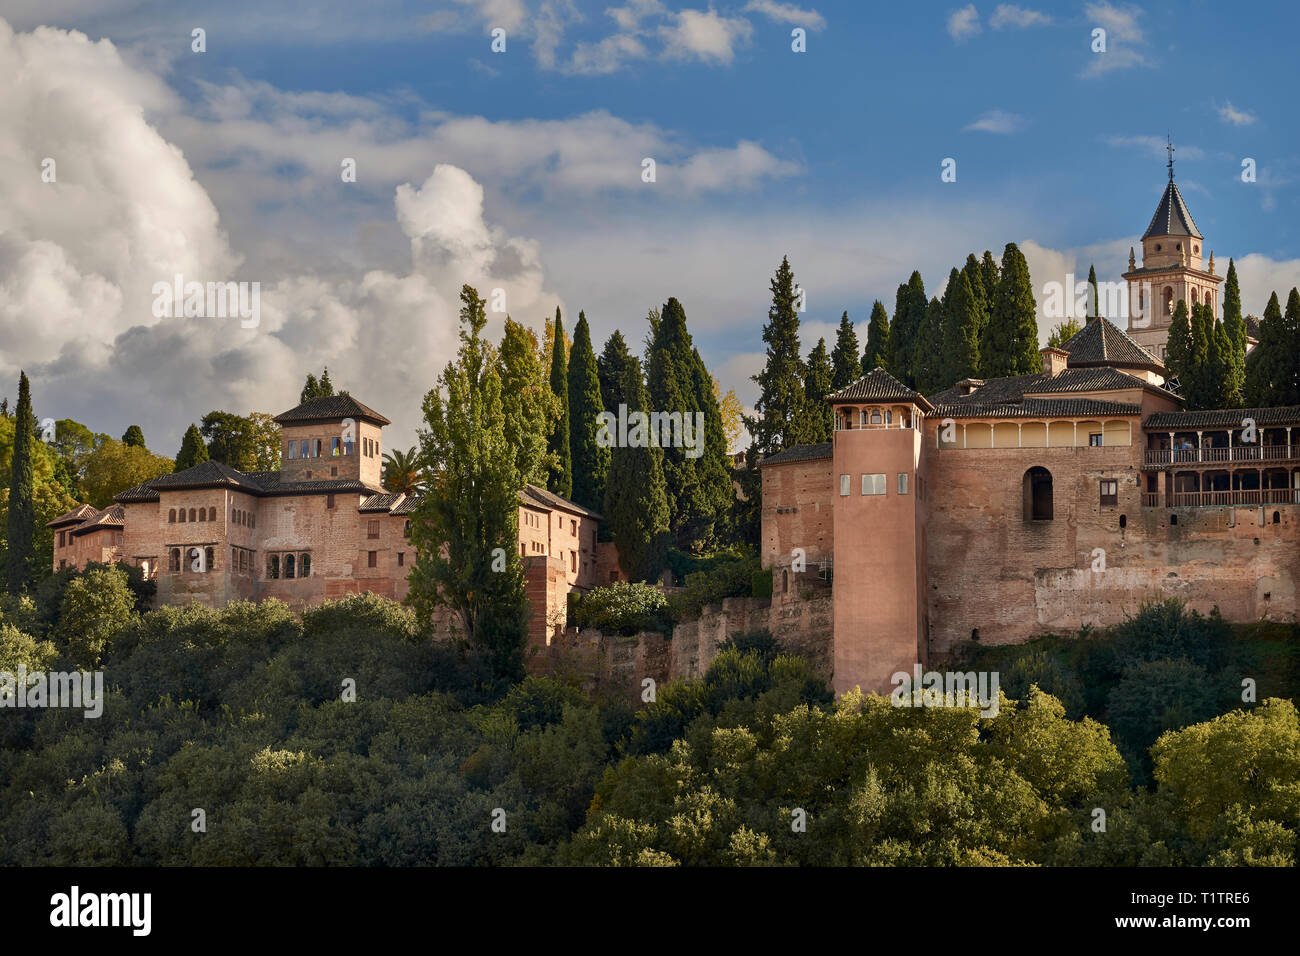 SPAIN ANDALUSIA GRANADA THE ALHAMBRA THE STEEPLE WITH BELLS AND PEOPLE ON THE OPEN VIEWING AREA Stock Photo